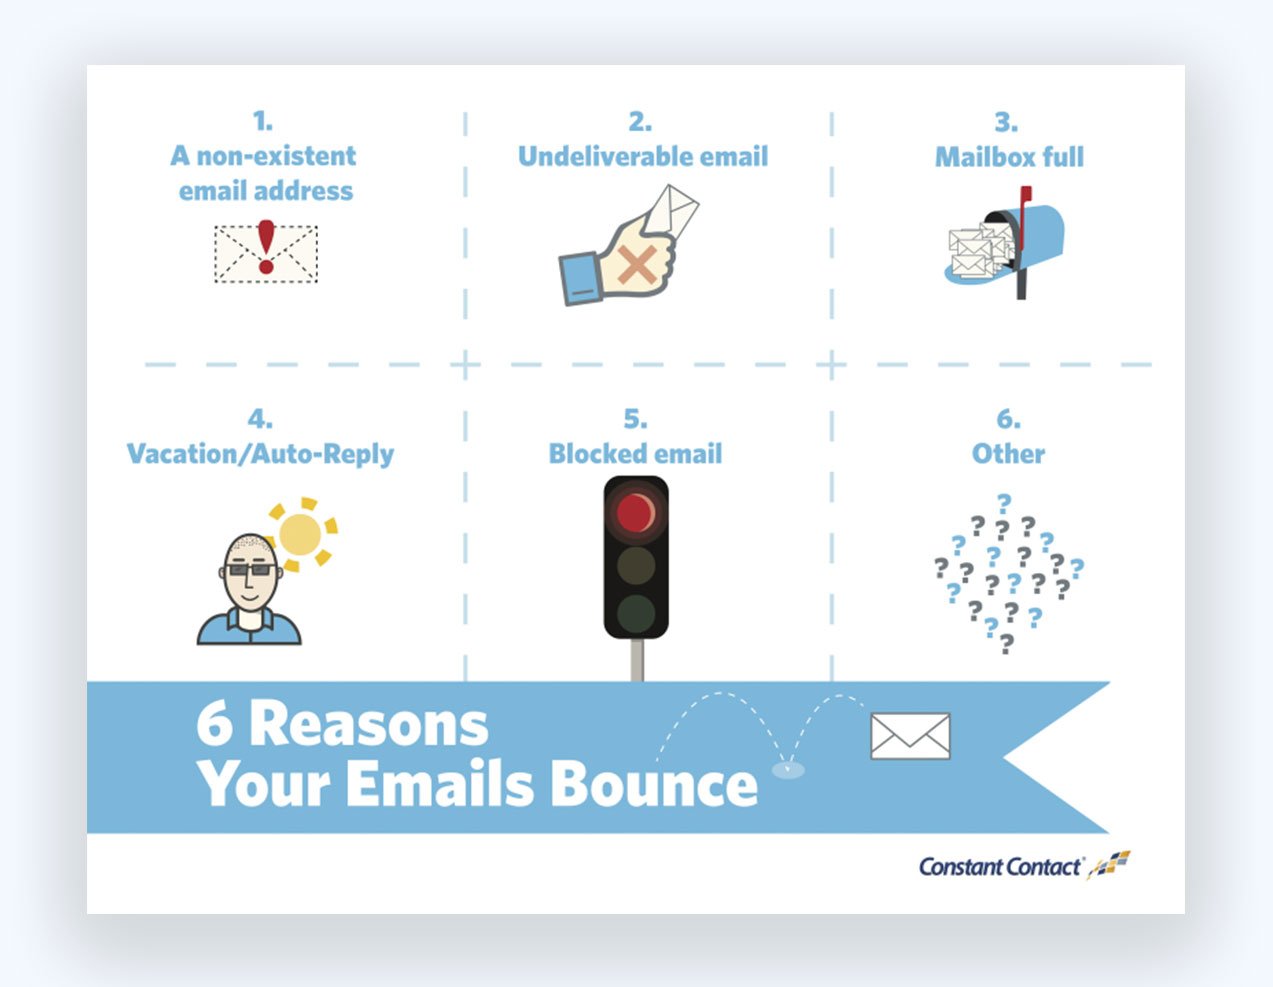 6 Reasons to Bounce Email